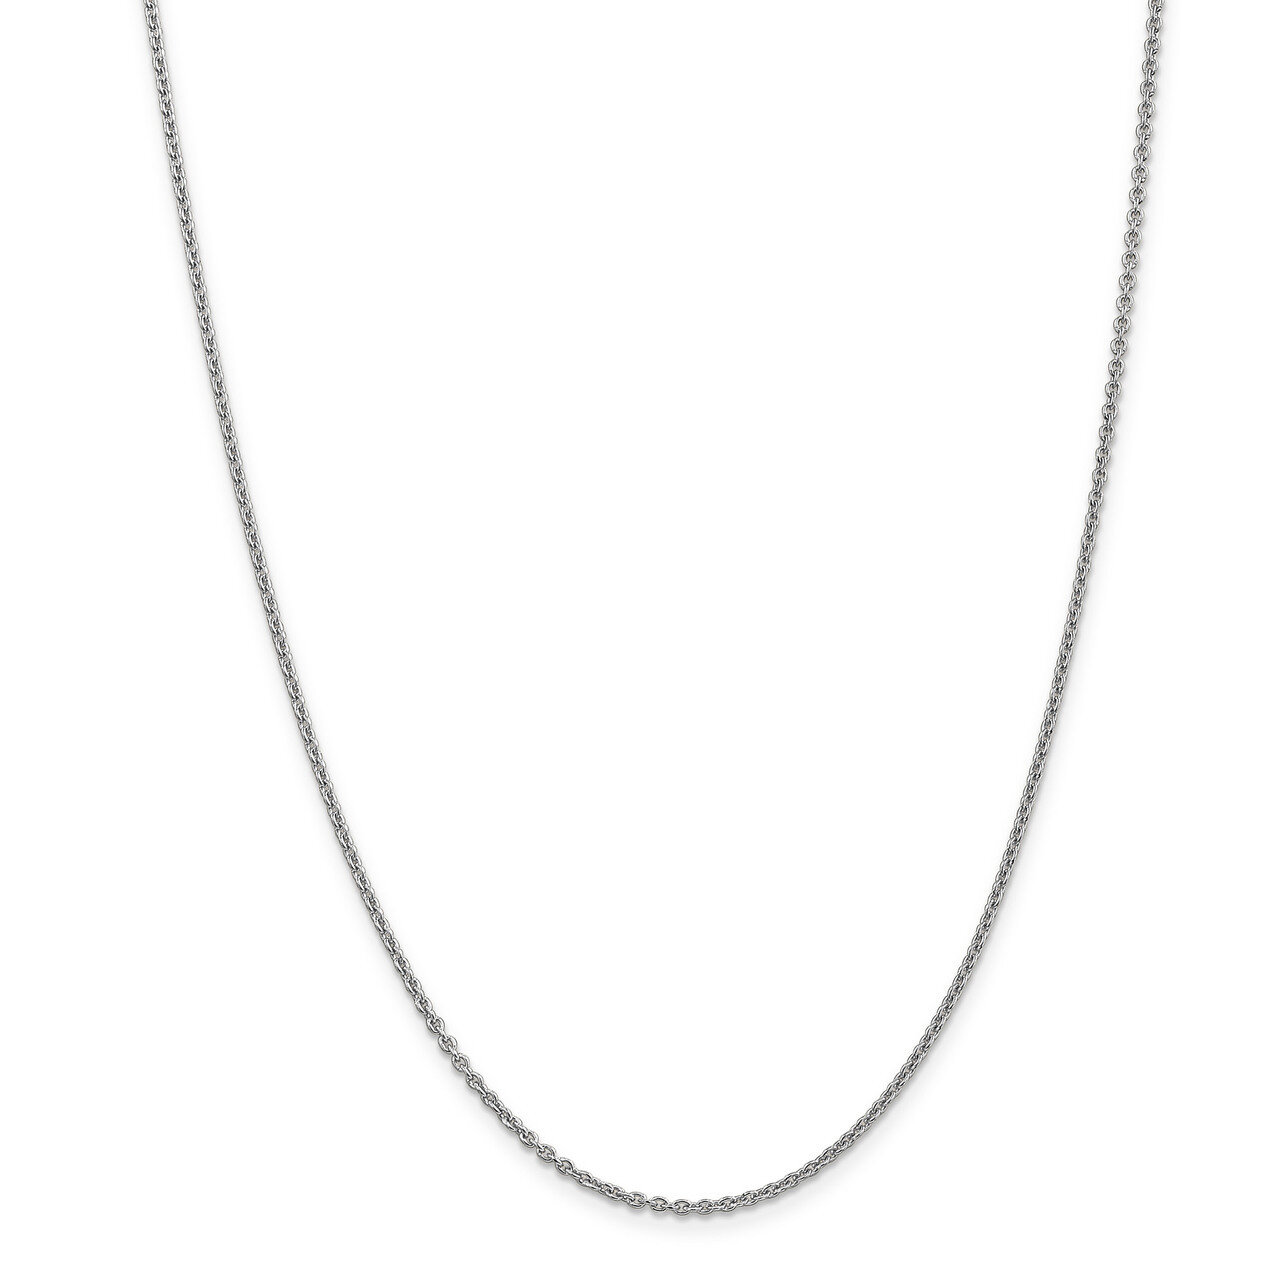 1.8 mm Round Cable Chain 20 Inch 14K White Gold HB-7243-20